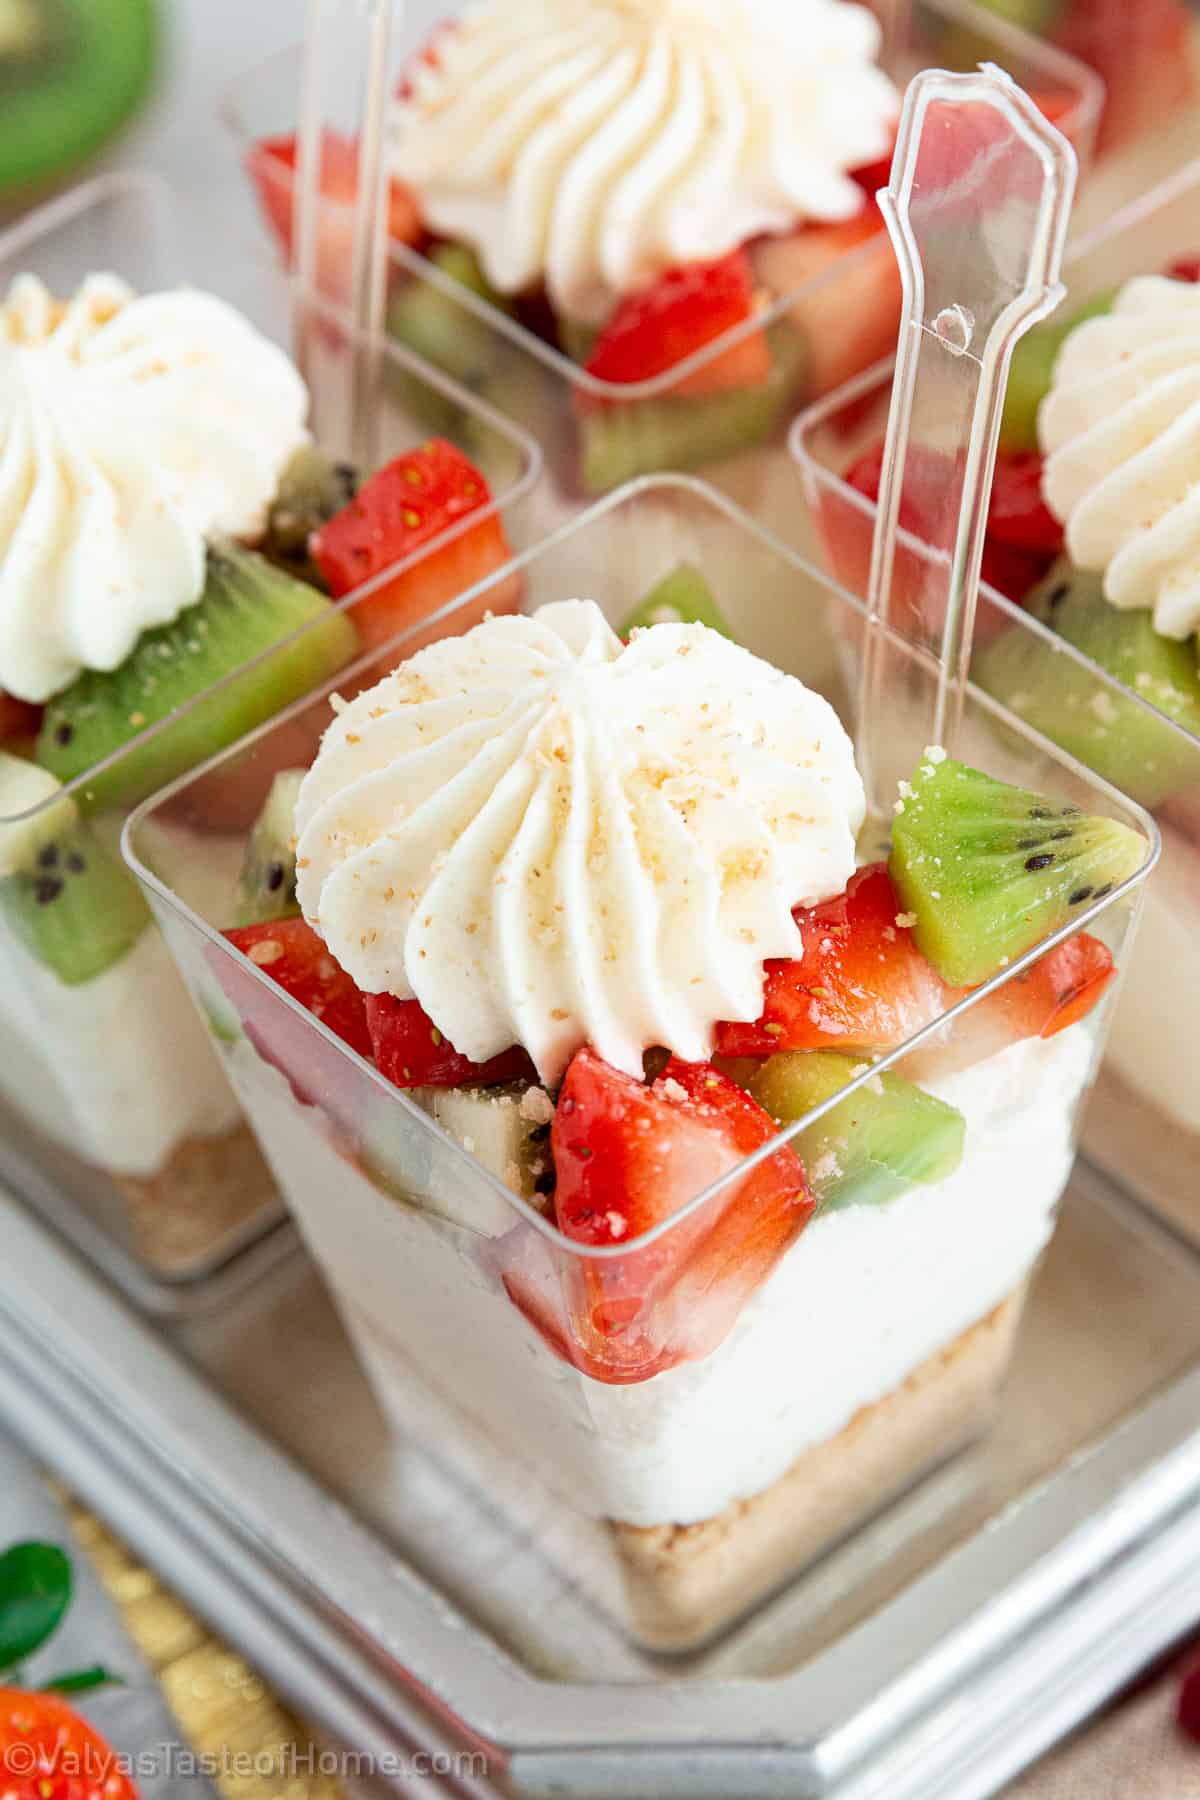 And this particular recipe is for Strawberry Kiwi Cheesecake Parfaits that have a delicious graham cracker crust layer, topped with a cheesecake filling, and topped with strawberries and kiwis.